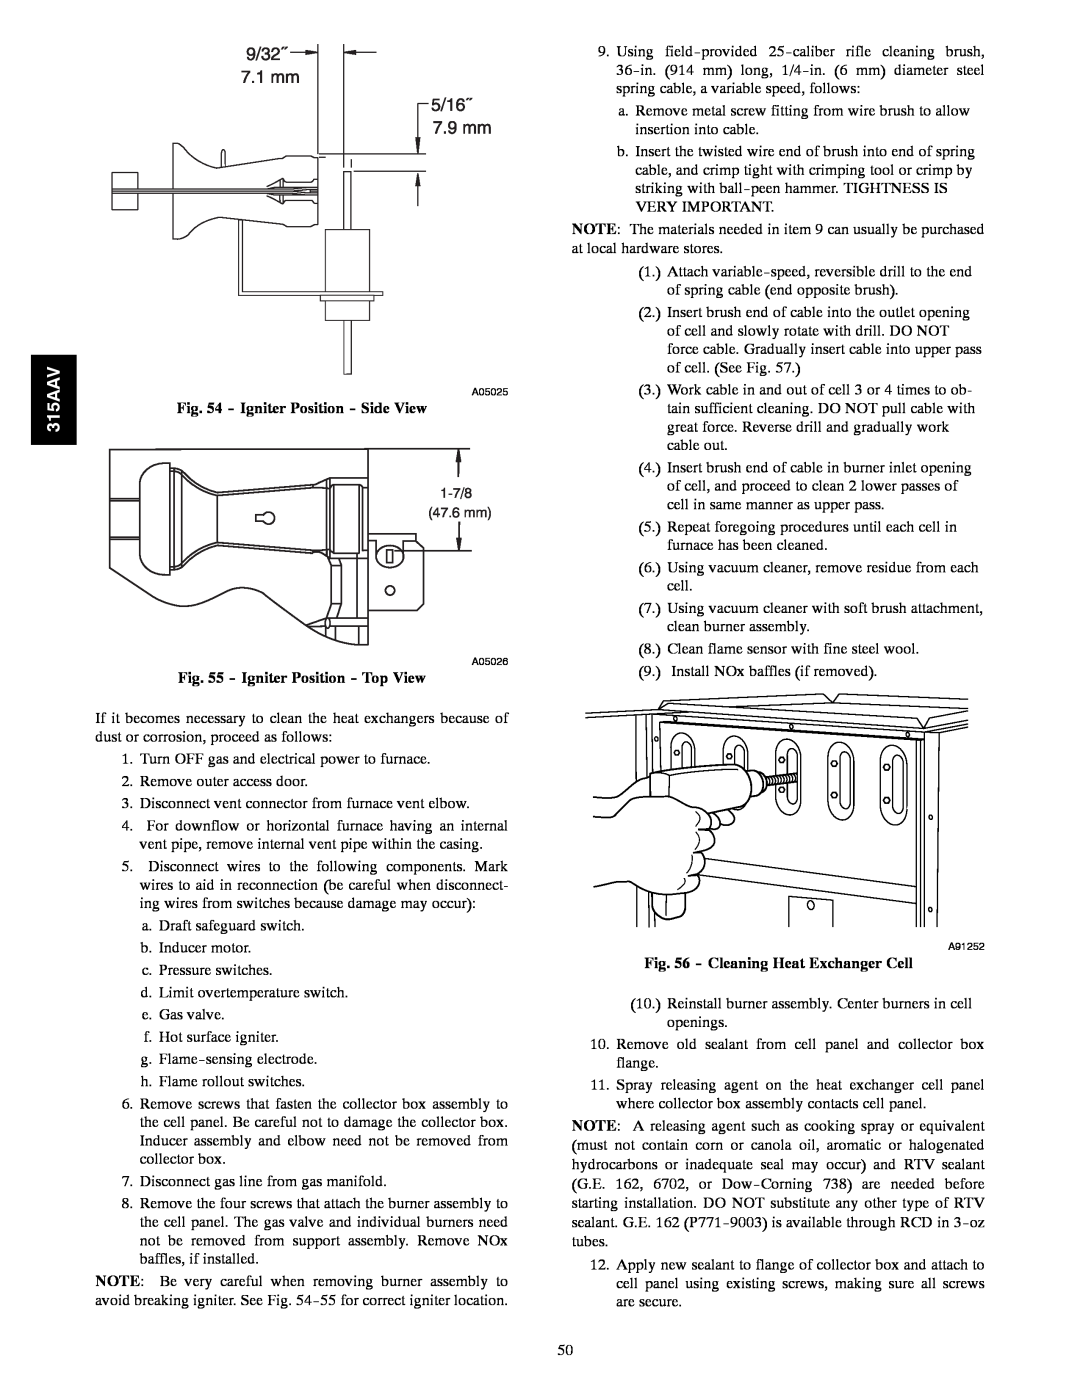 Bryant 315AAV instruction manual Igniter Position - Side View, Igniter Position - Top View, Cleaning Heat Exchanger Cell 